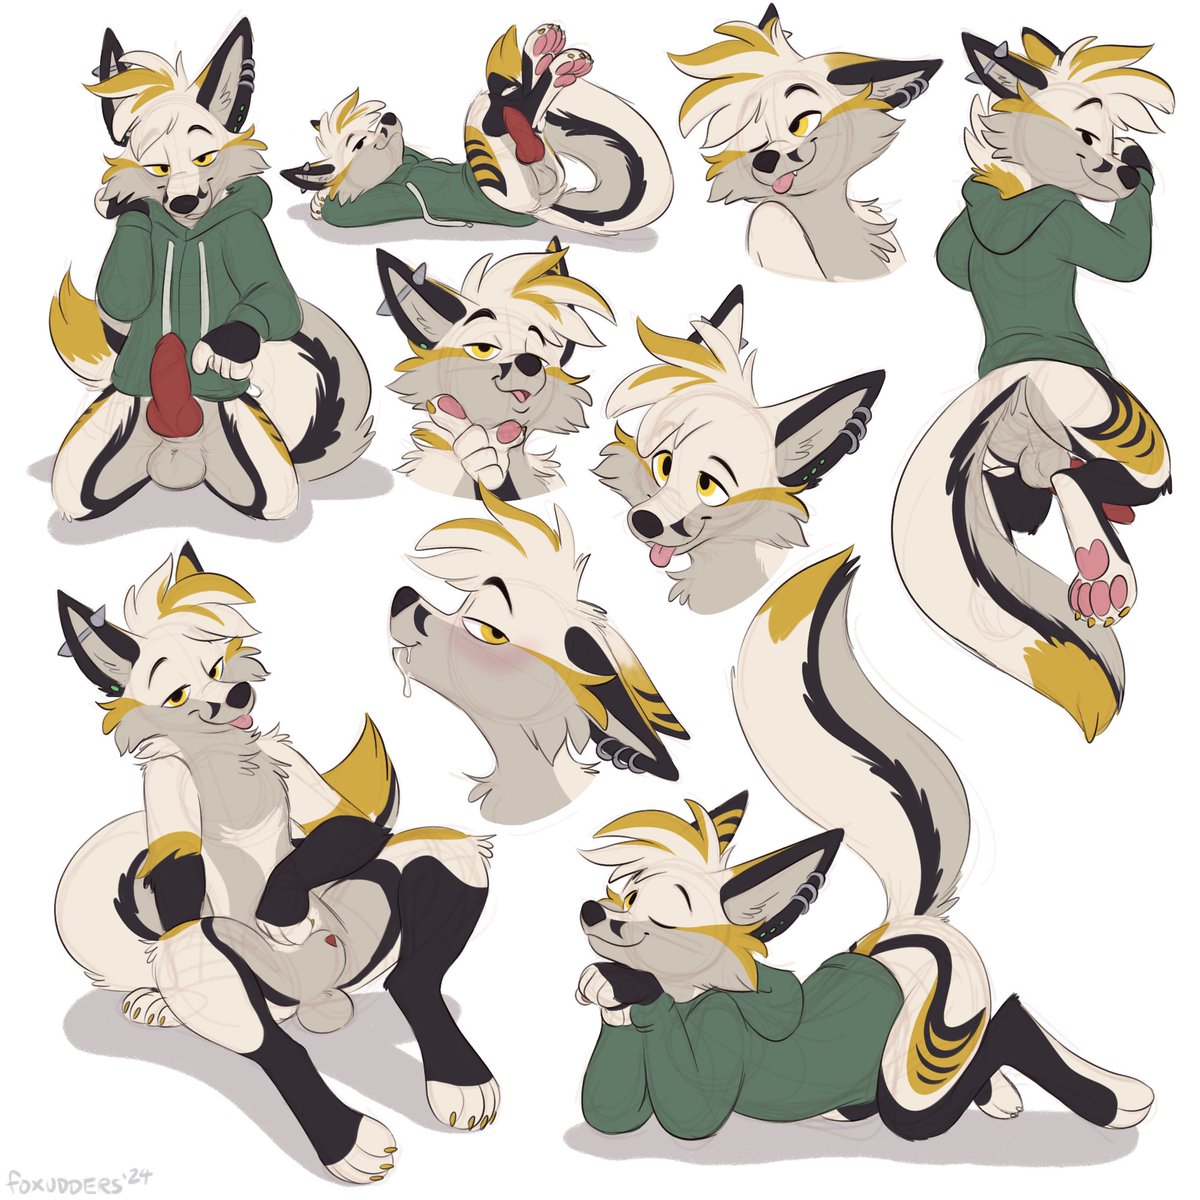 𝘚𝘰𝘮𝘦𝘰𝘯𝘦'𝘴 𝘭𝘦𝘵𝘵𝘪𝘯𝘨 𝘪𝘵 𝘢𝘭𝘭 𝘩𝘢𝘯𝘨 𝘰𝘶𝘵...~ Doodle sheet for @JasFoxxinAbout, doing just that!